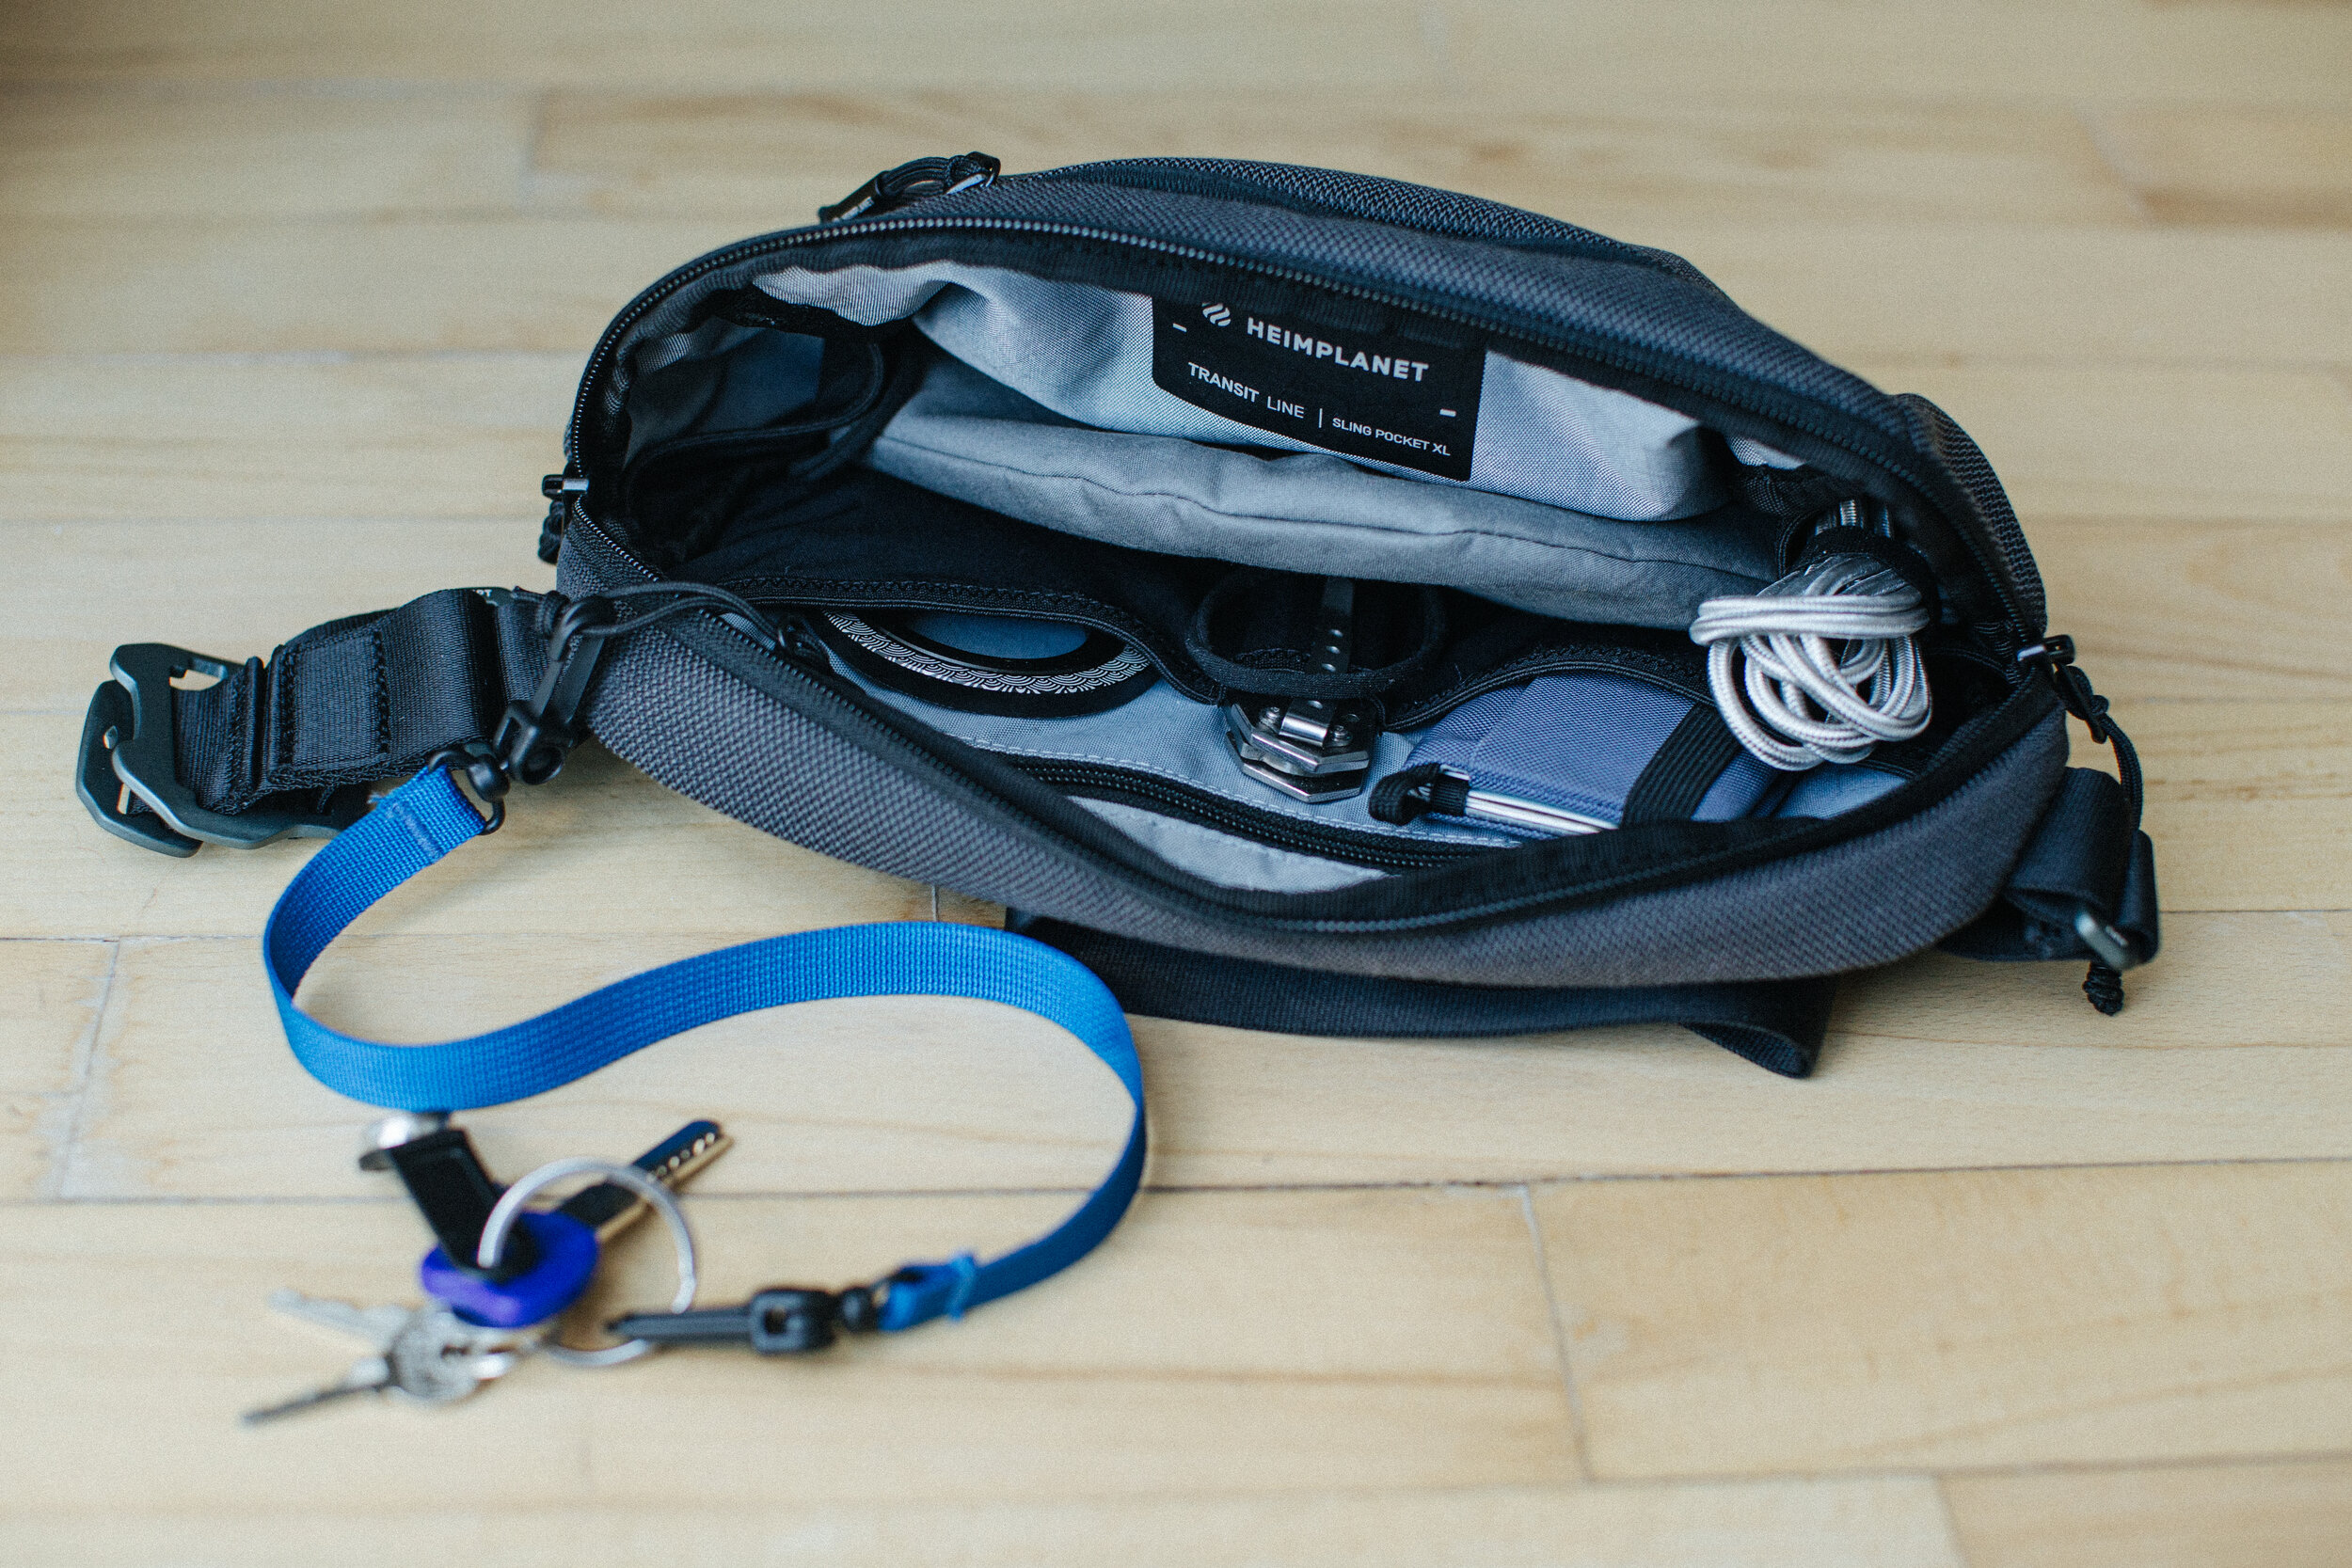 HEIMPLANET SLING POCKET XL : REVIEW — Wandering Dots